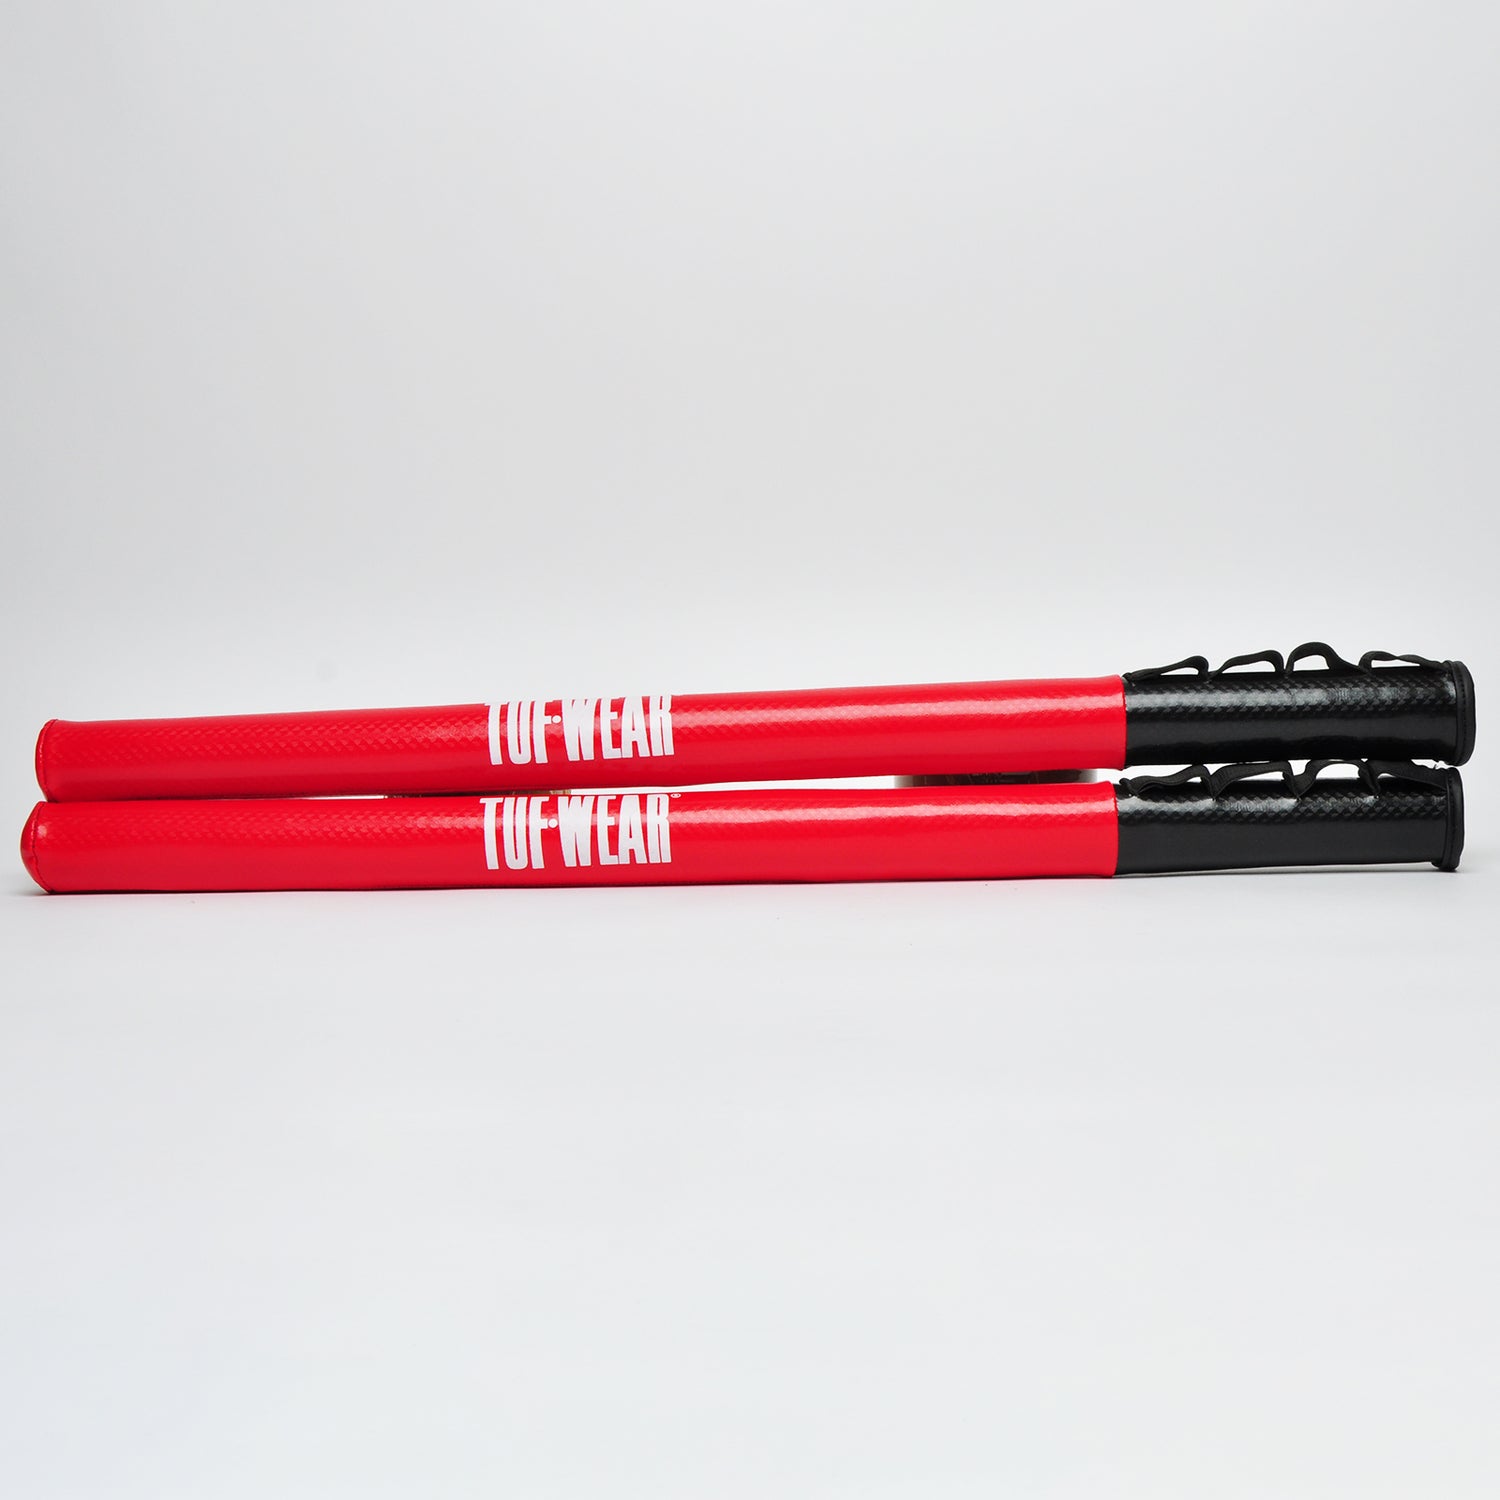 Tuf Wear Eagle Training Stick with Finger Grips.